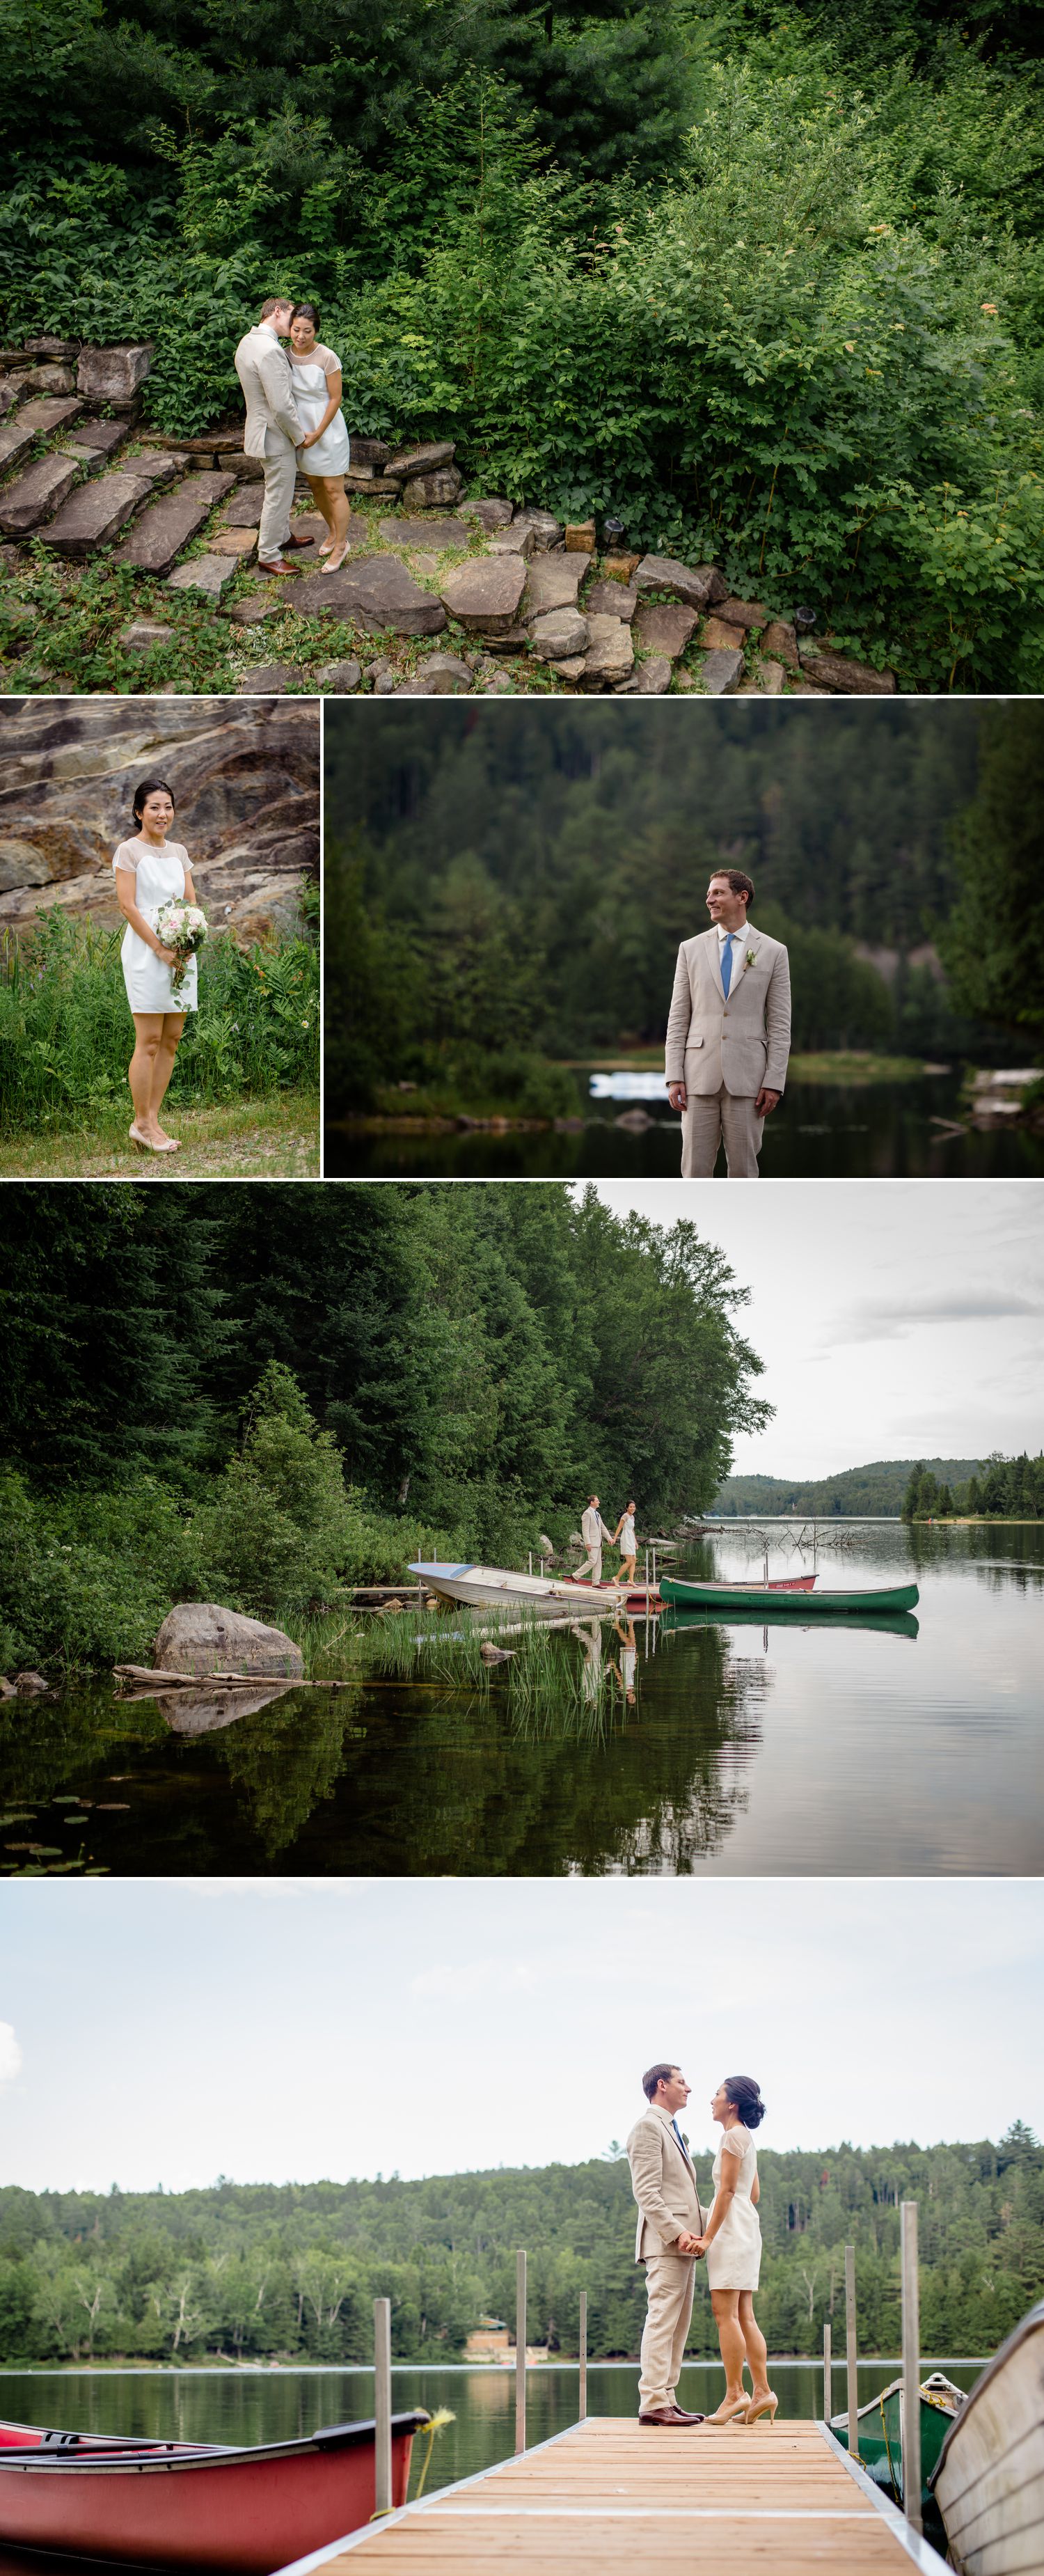 Portraits of the bride and groom during their wedding at their cottage